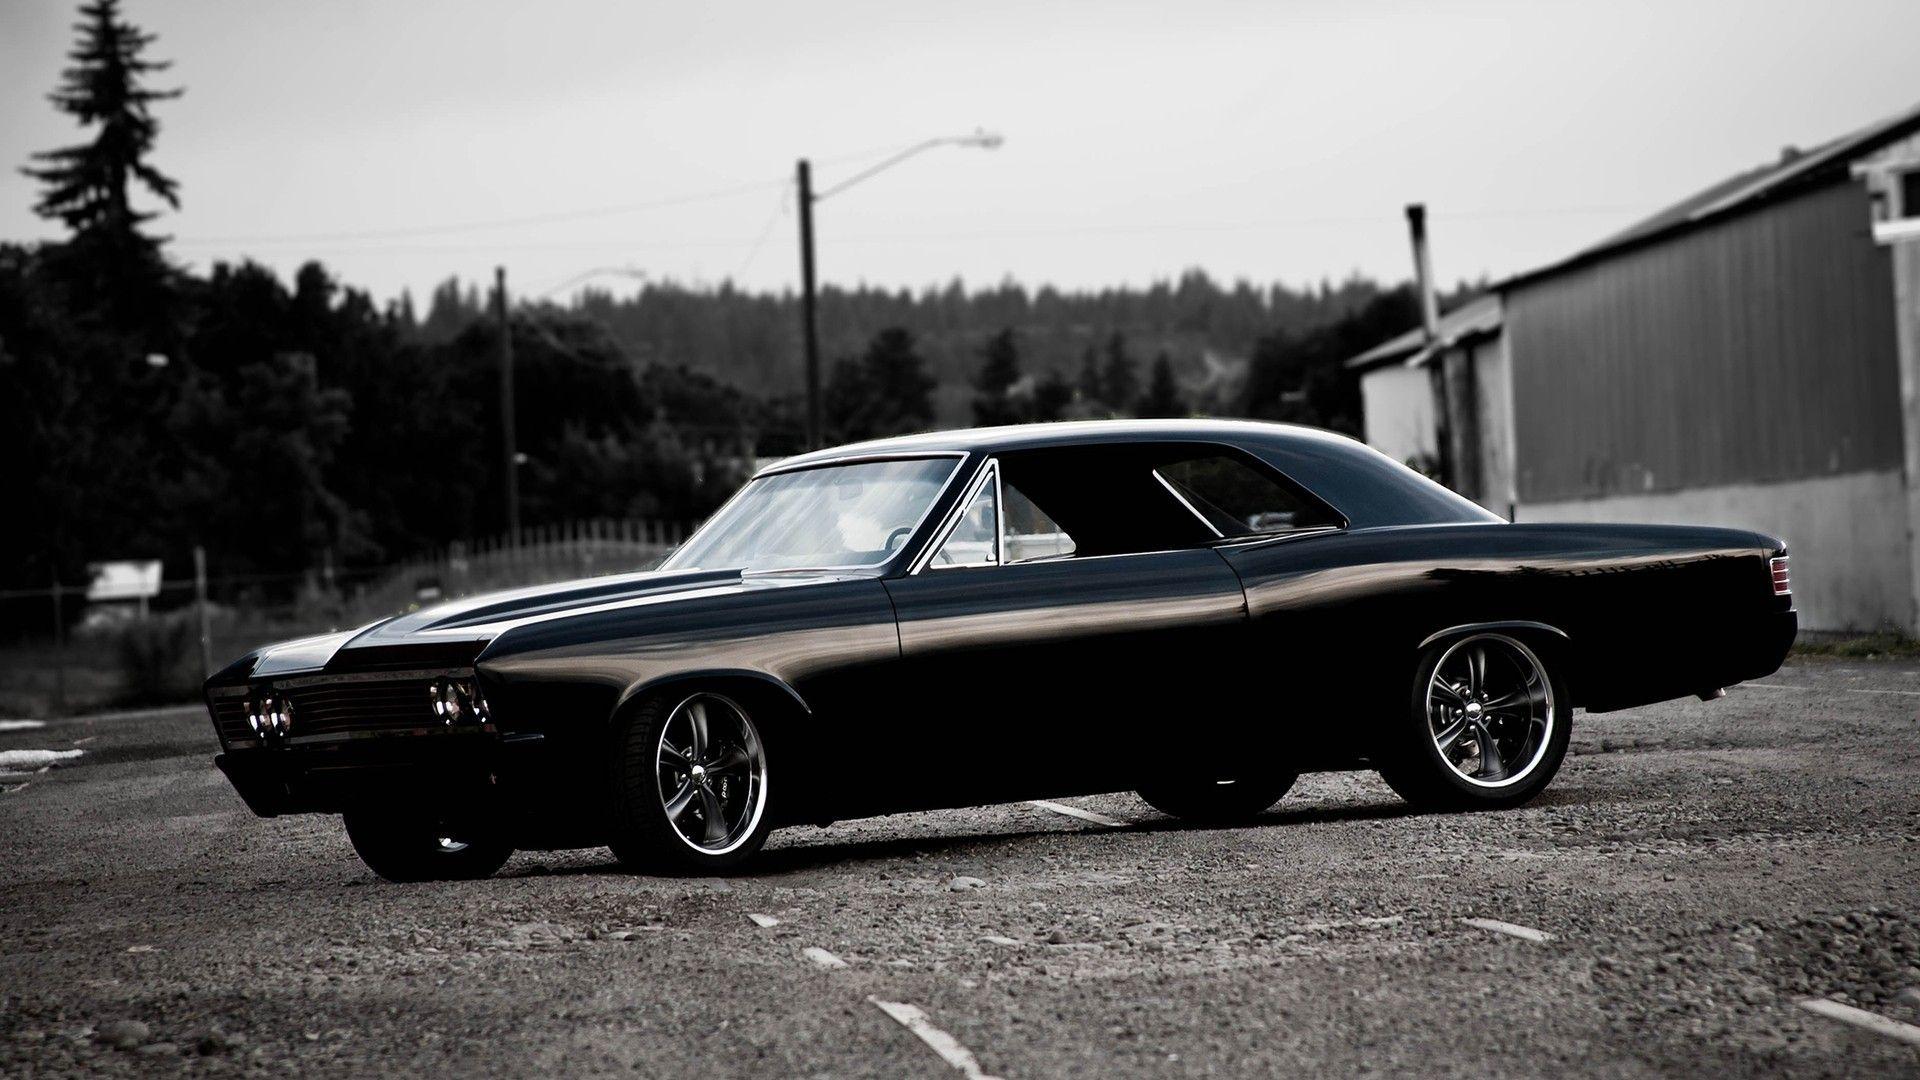 image For > Chevy Chevelle Ss Wallpaper